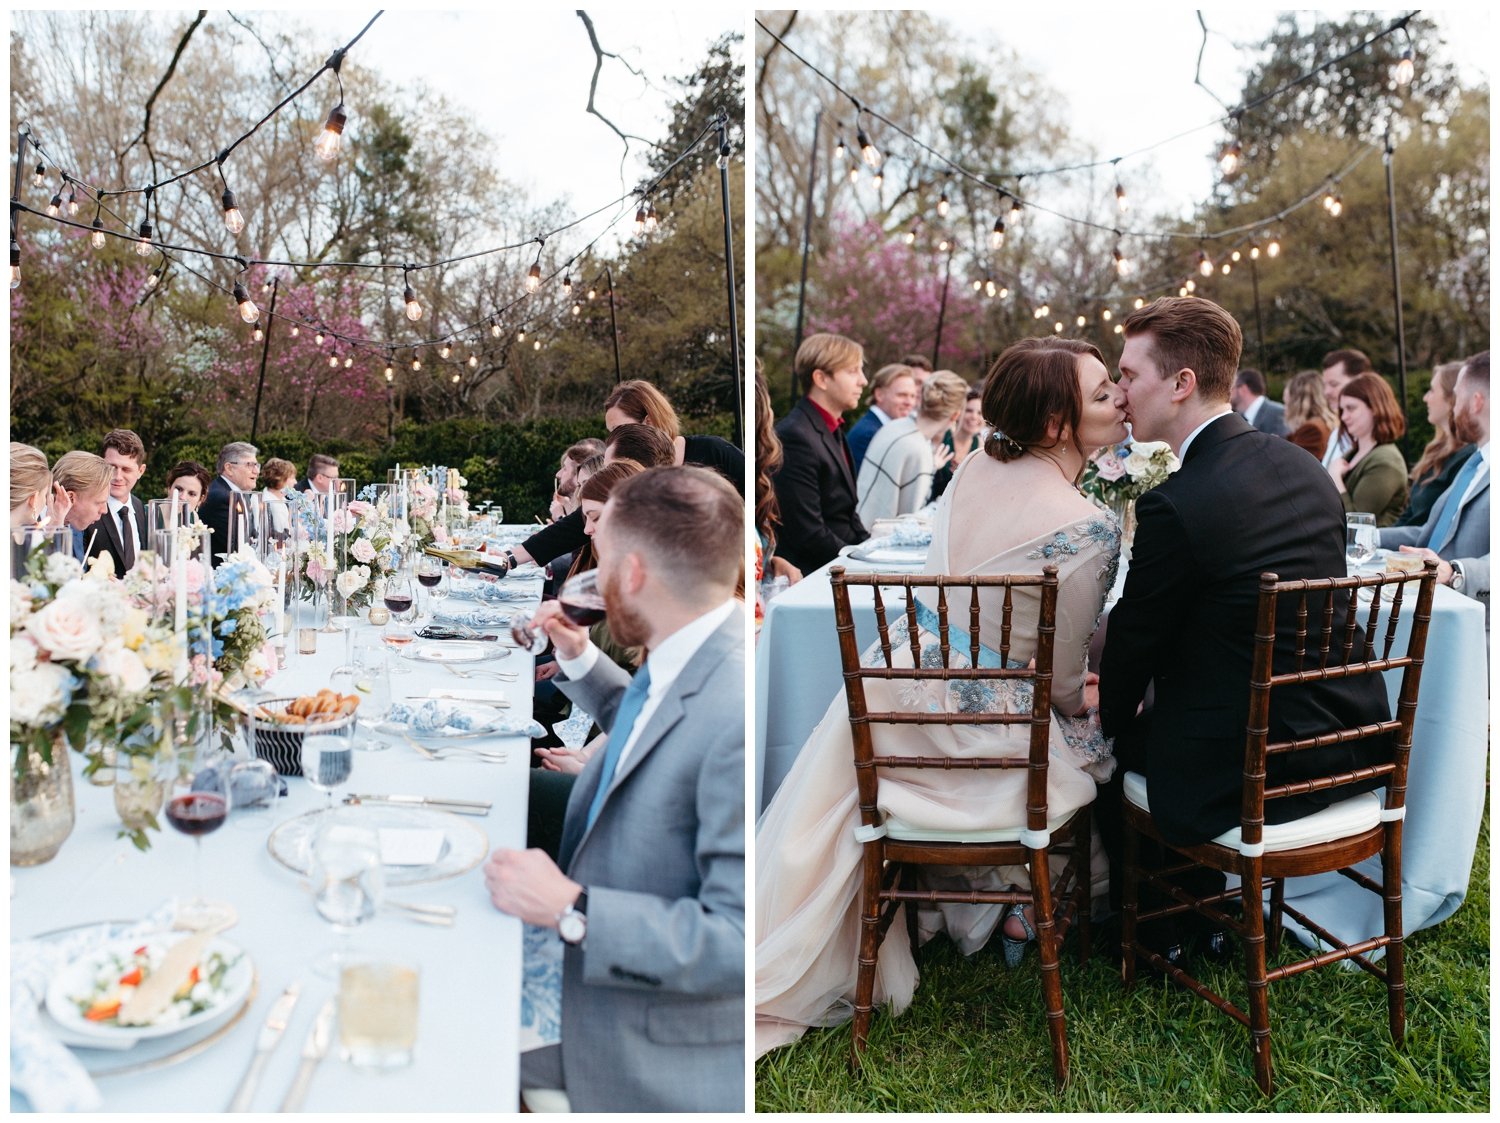 A couple enjoys dinner with their guests at an Atlanta intimate wedding venue